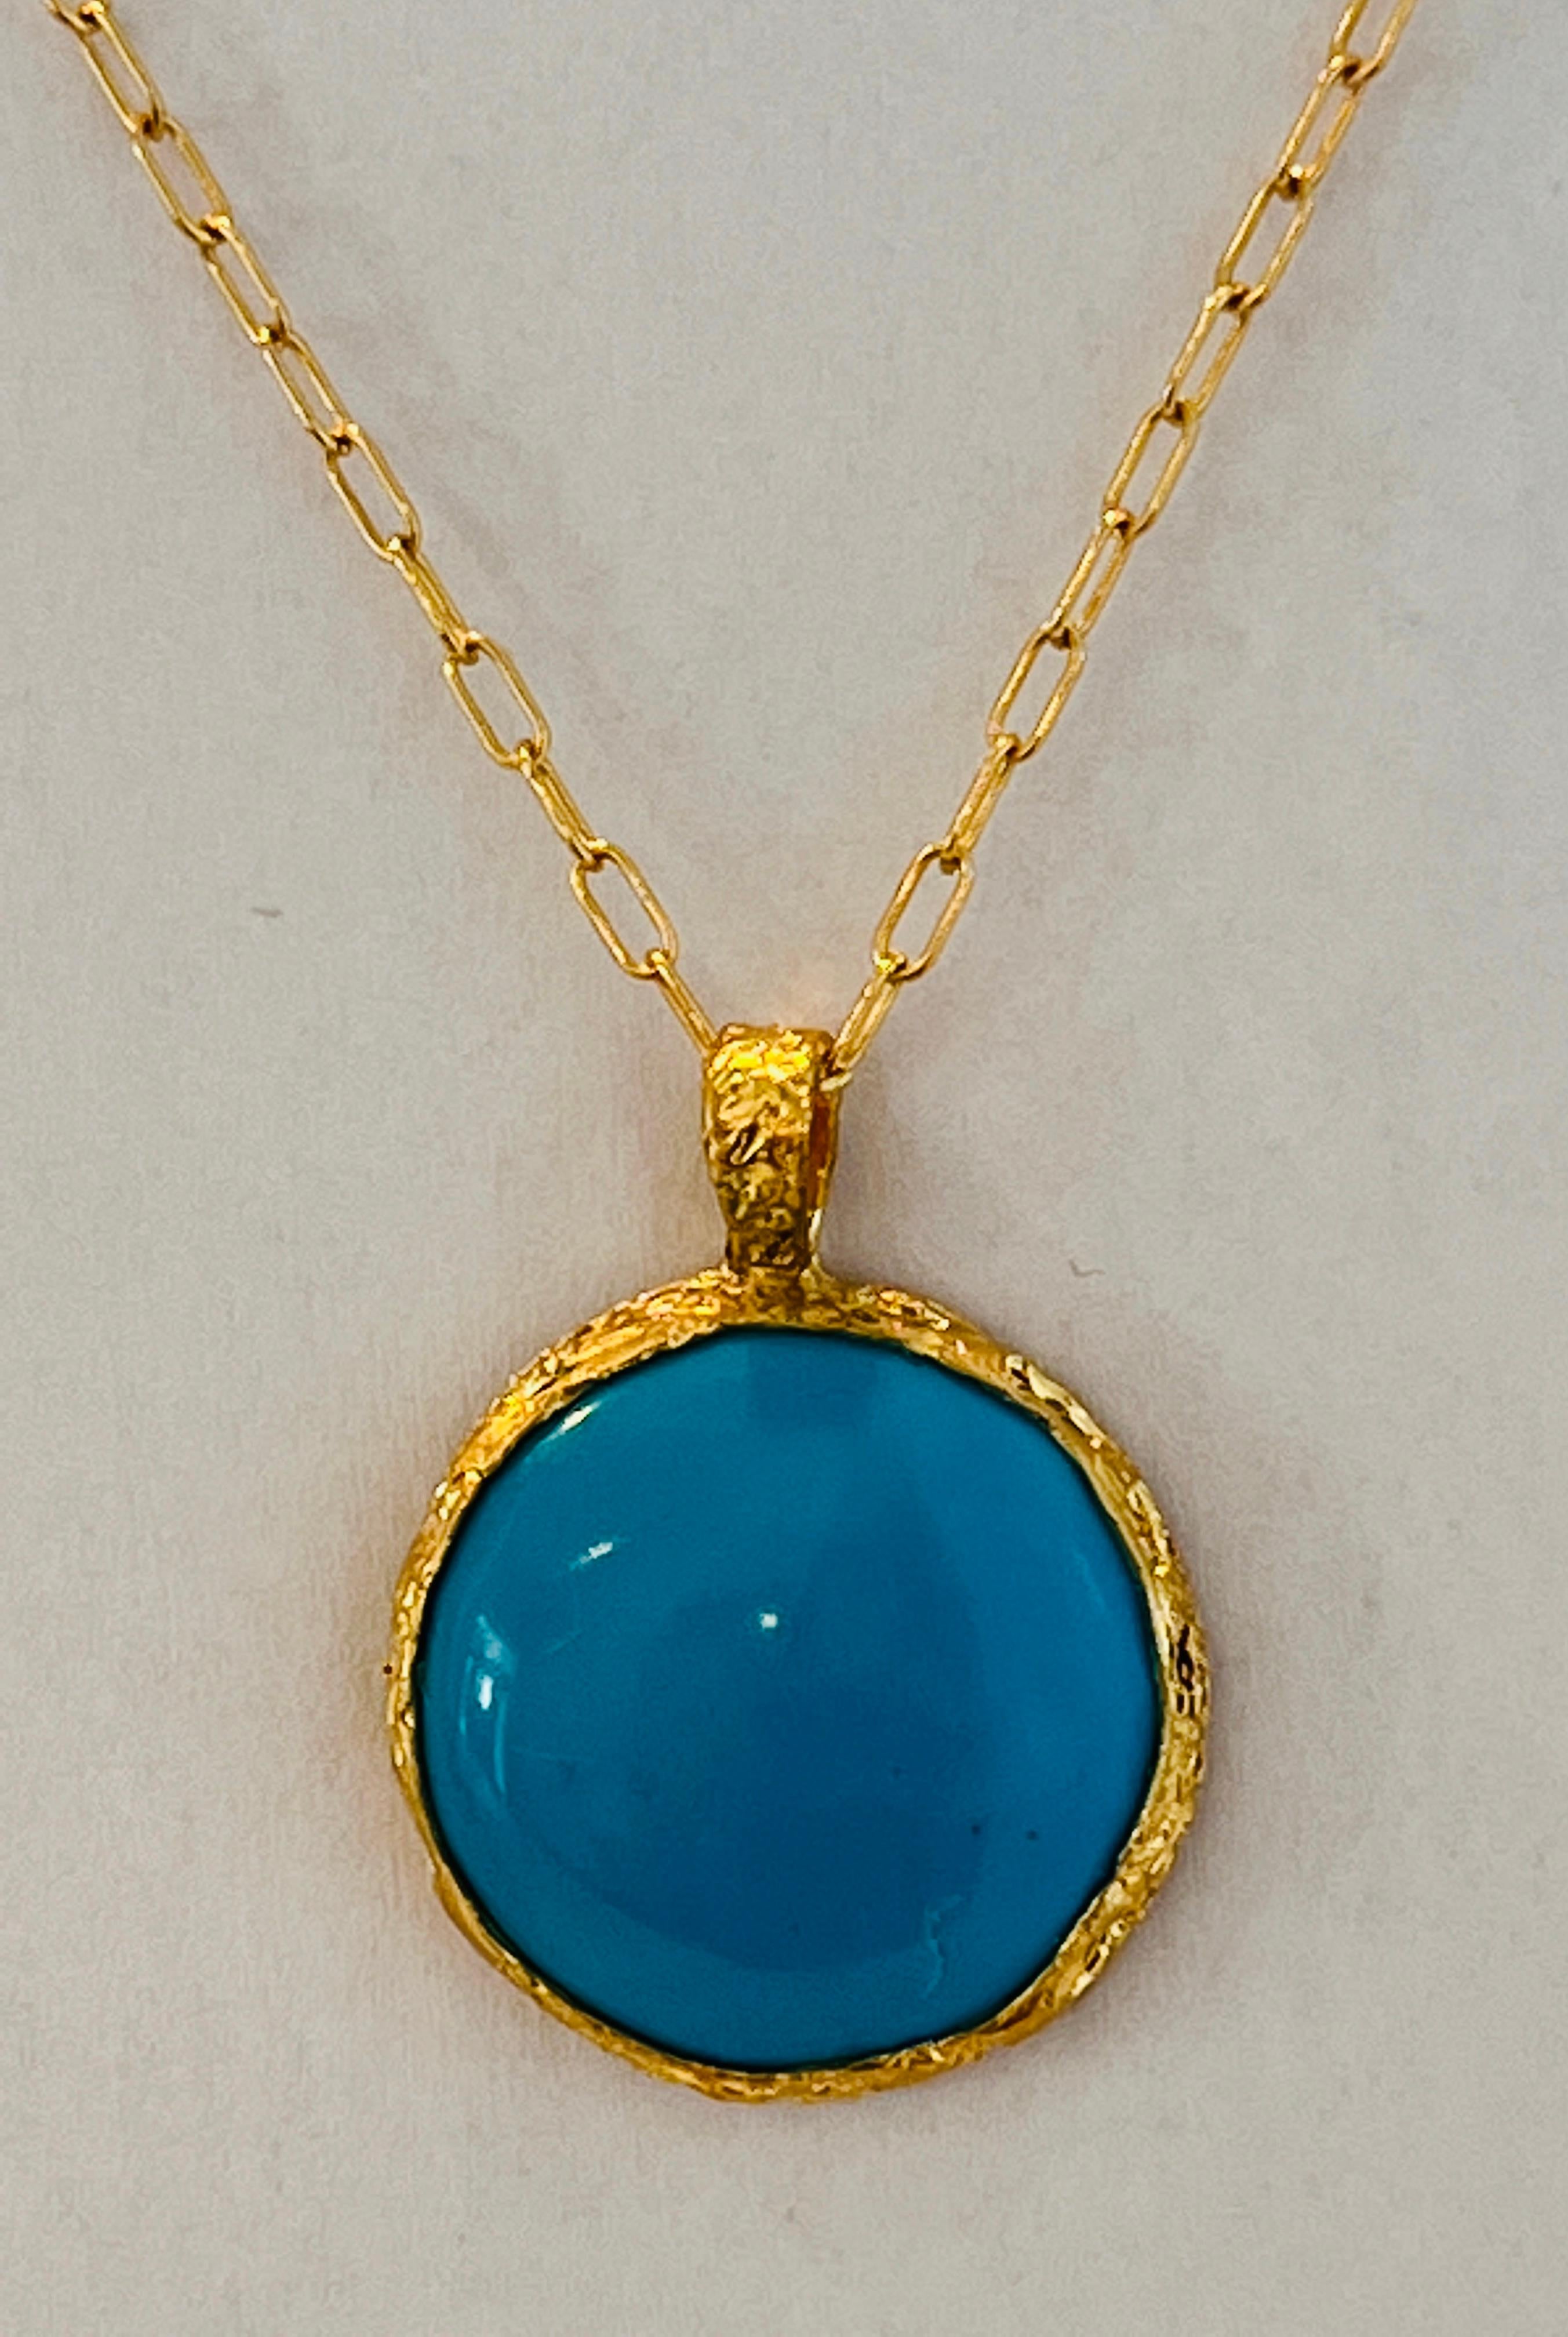 Turquoise Handmade Pendant in 22k Gold, by Tagili 1